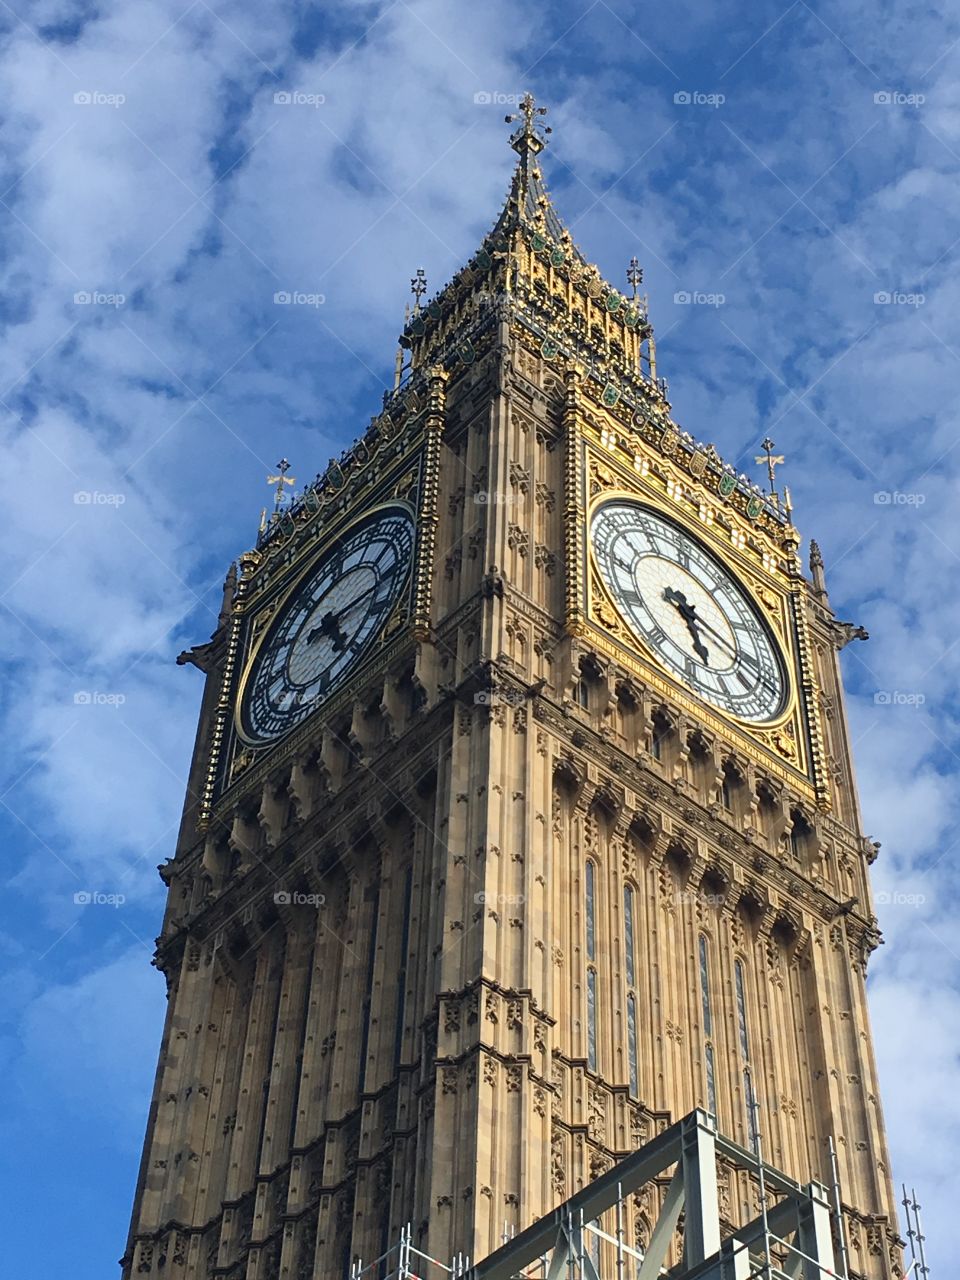 A close up of Big Ben in London against a blue sky 